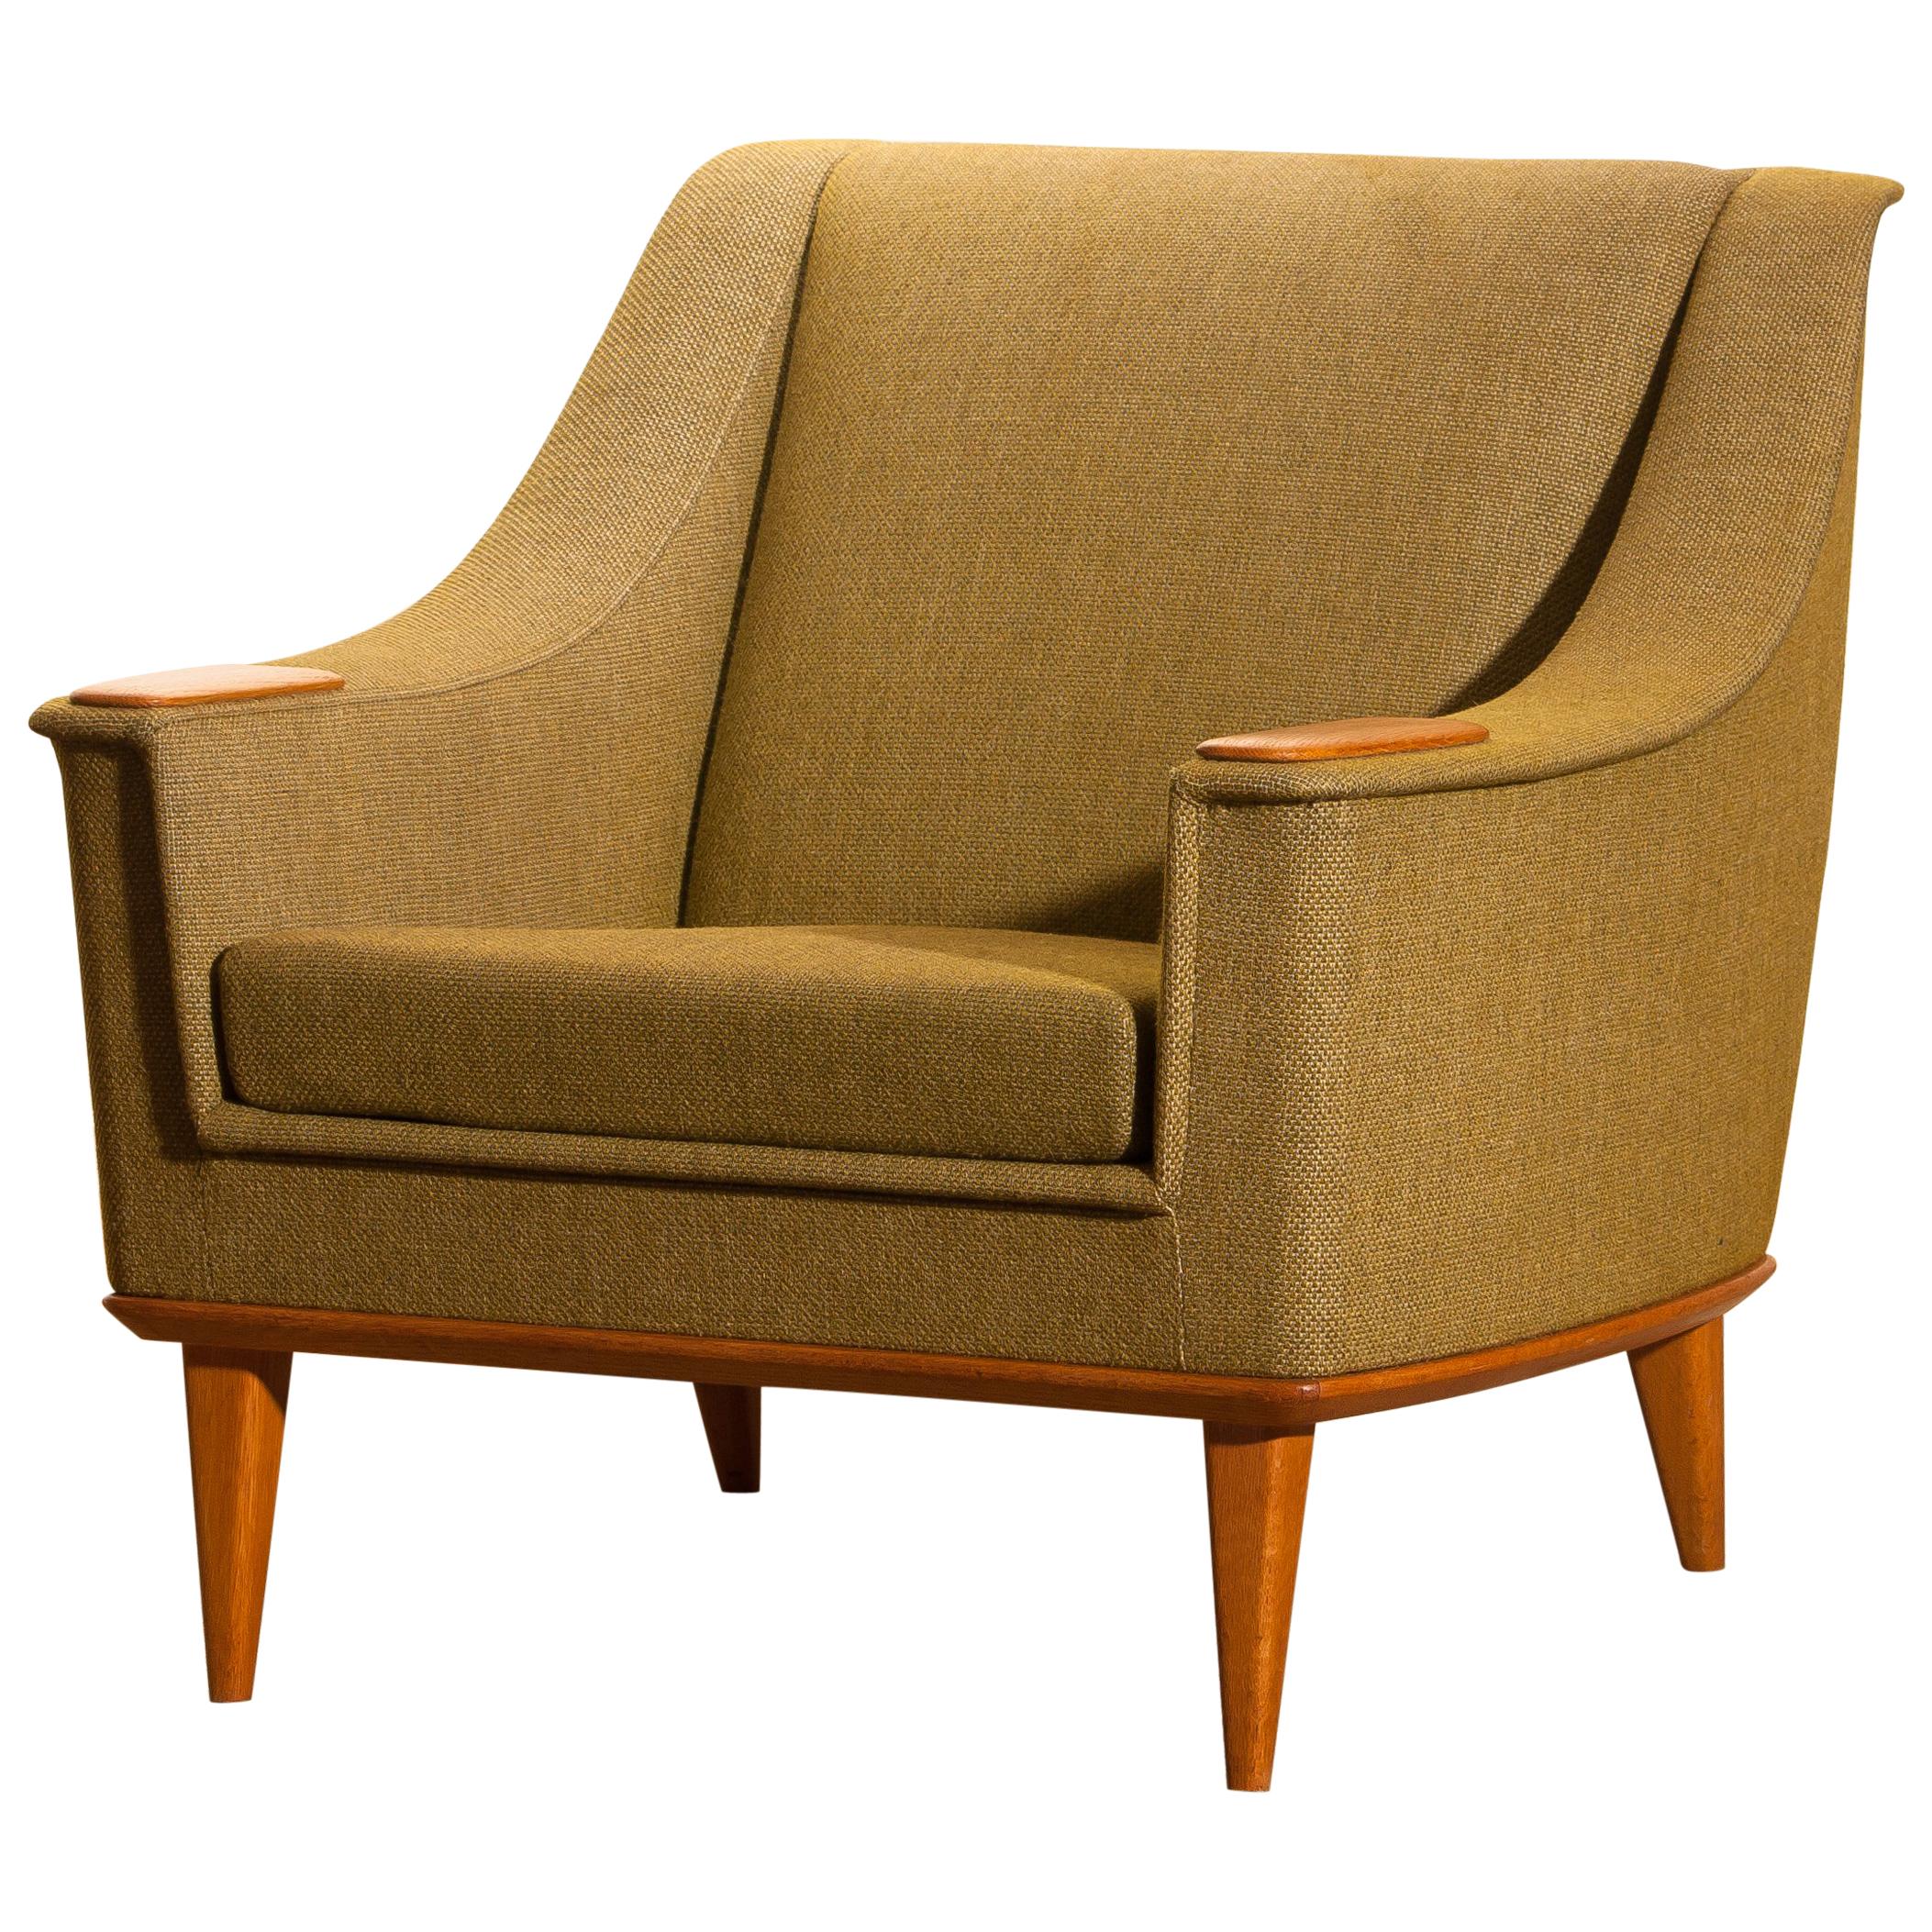 Beautiful and original midcentury lounge / easy chair with oak details by Folke Ohlsson for DUX, Sweden.
This chair sits extremely comfortable and is in good condition.

Period: 1960.
The dimensions are: Depth 77 cm - 30 inch, wide 77 cm - 30